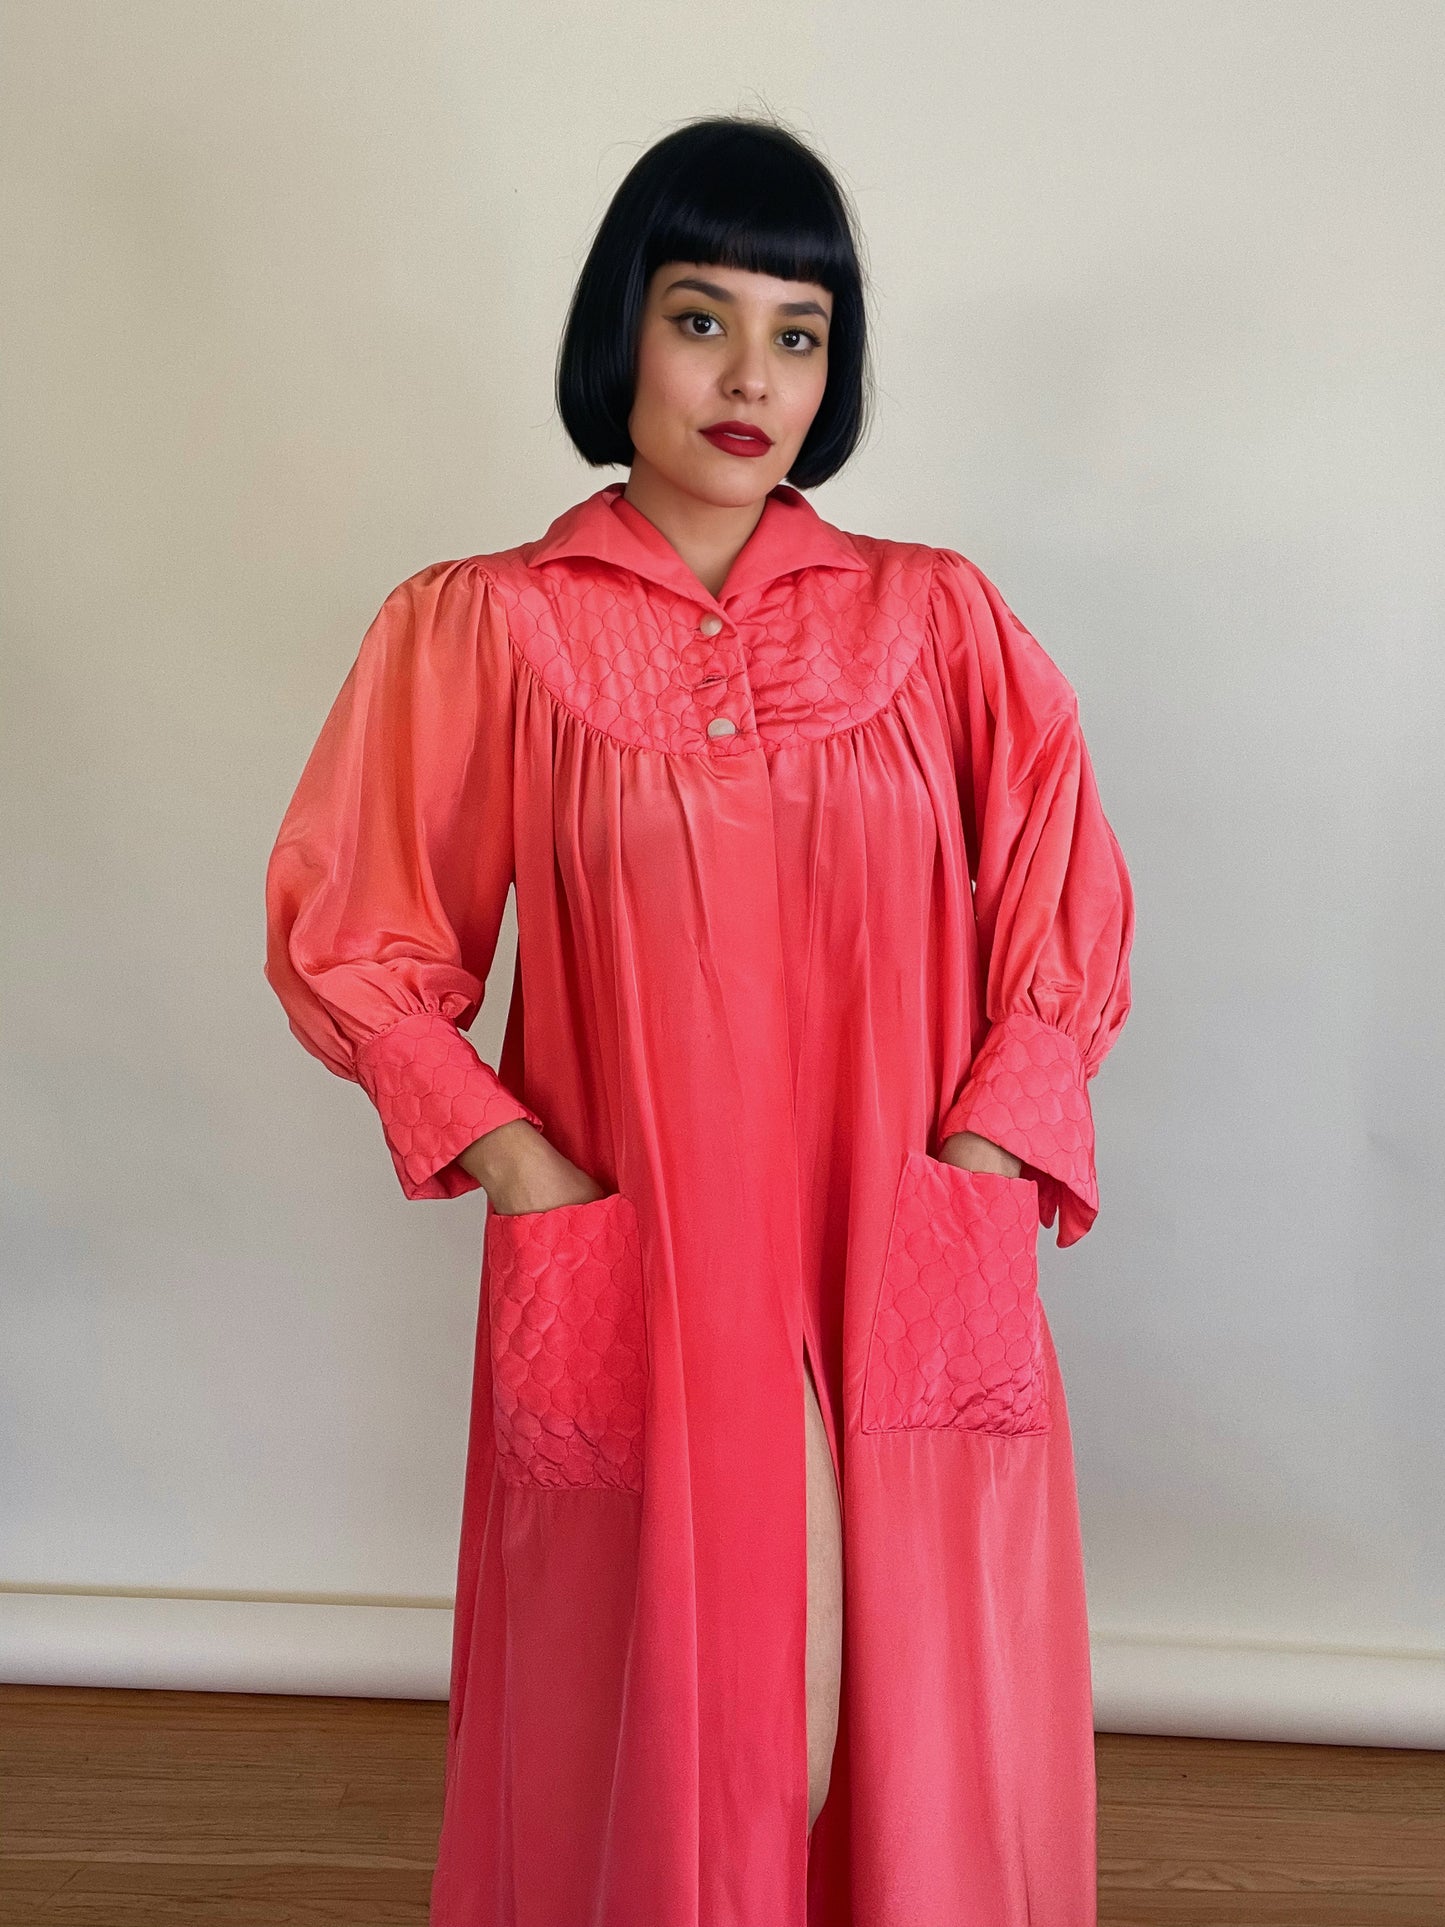 Vintage 40s 50s Salmon Coral Pink Duster Coat w/ Balloon Sleeve Fits Most Sizes